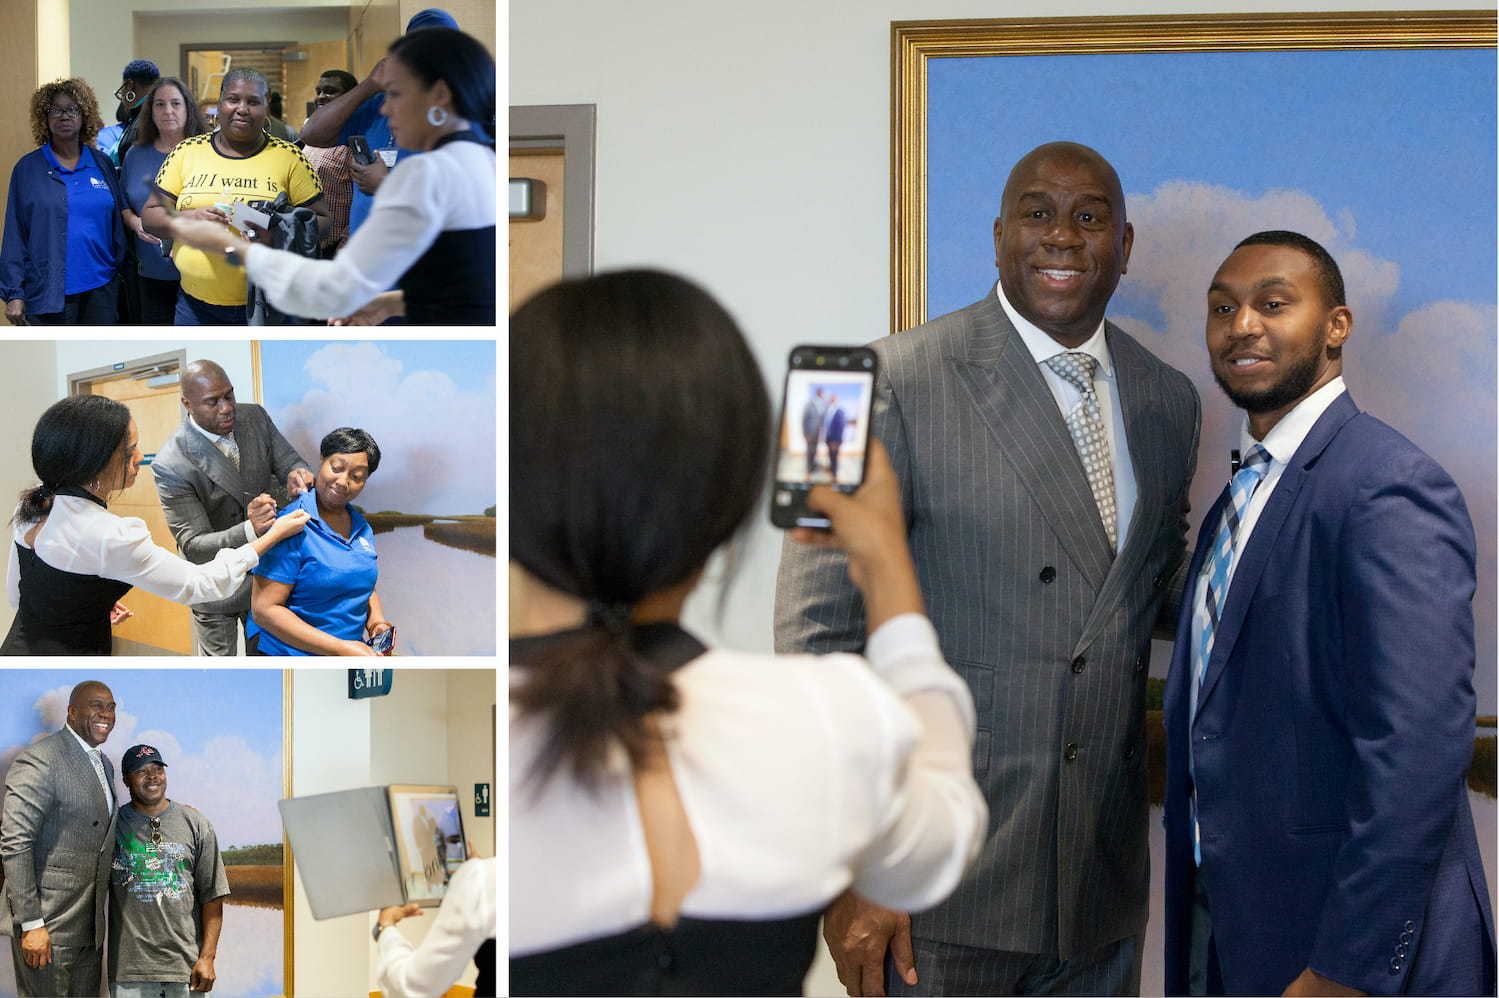 Magic Johnson poses for photos and signs autographs for SodexoMAGIC employees at MUSC